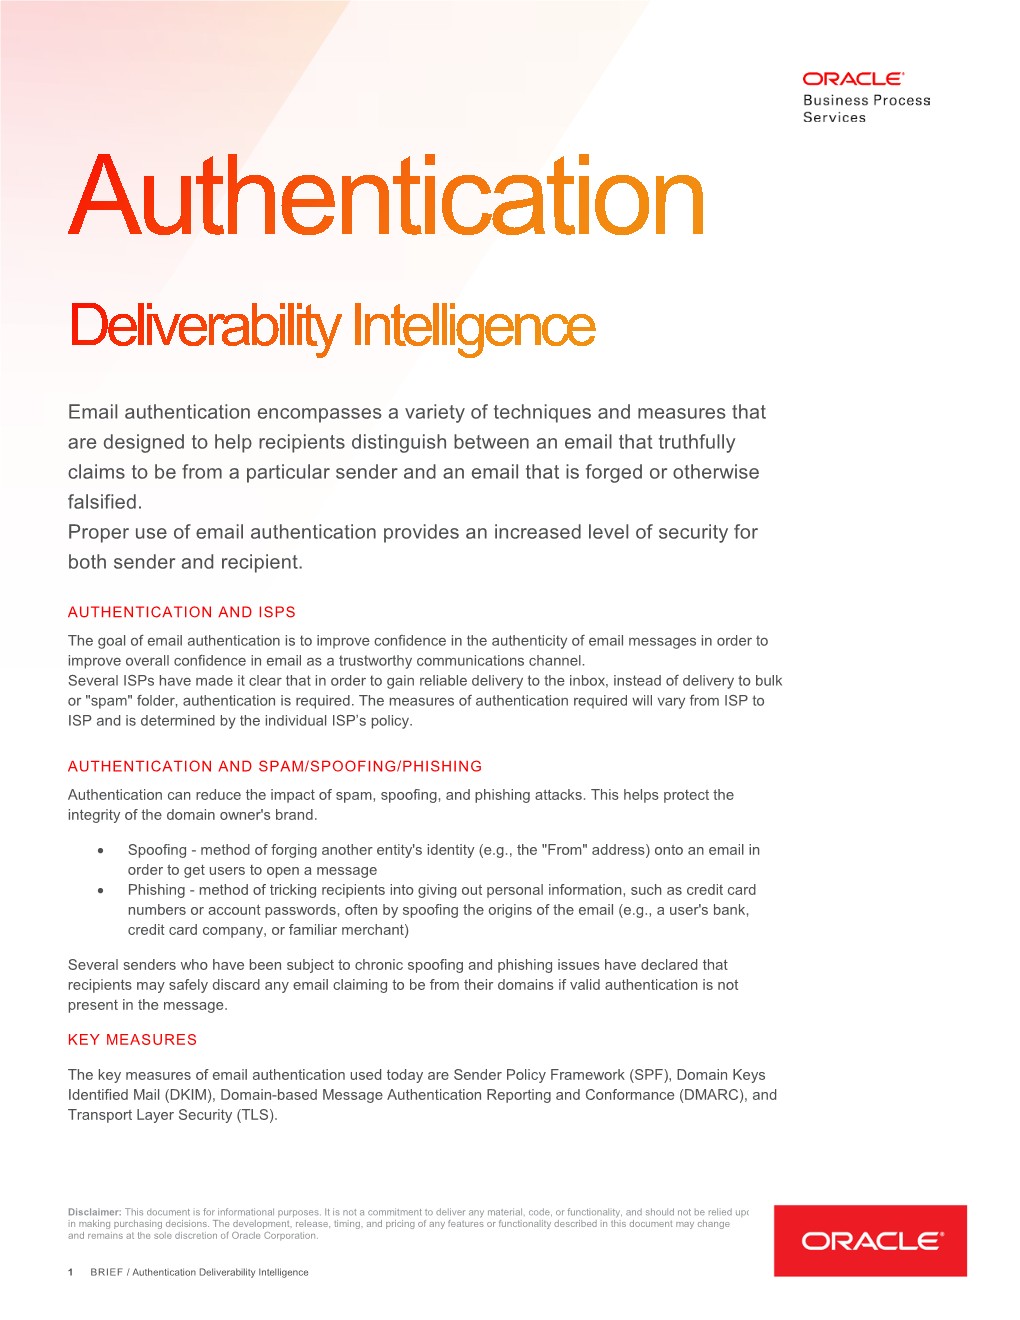 Email Authentication Encompasses a Variety of Techniques and Measures